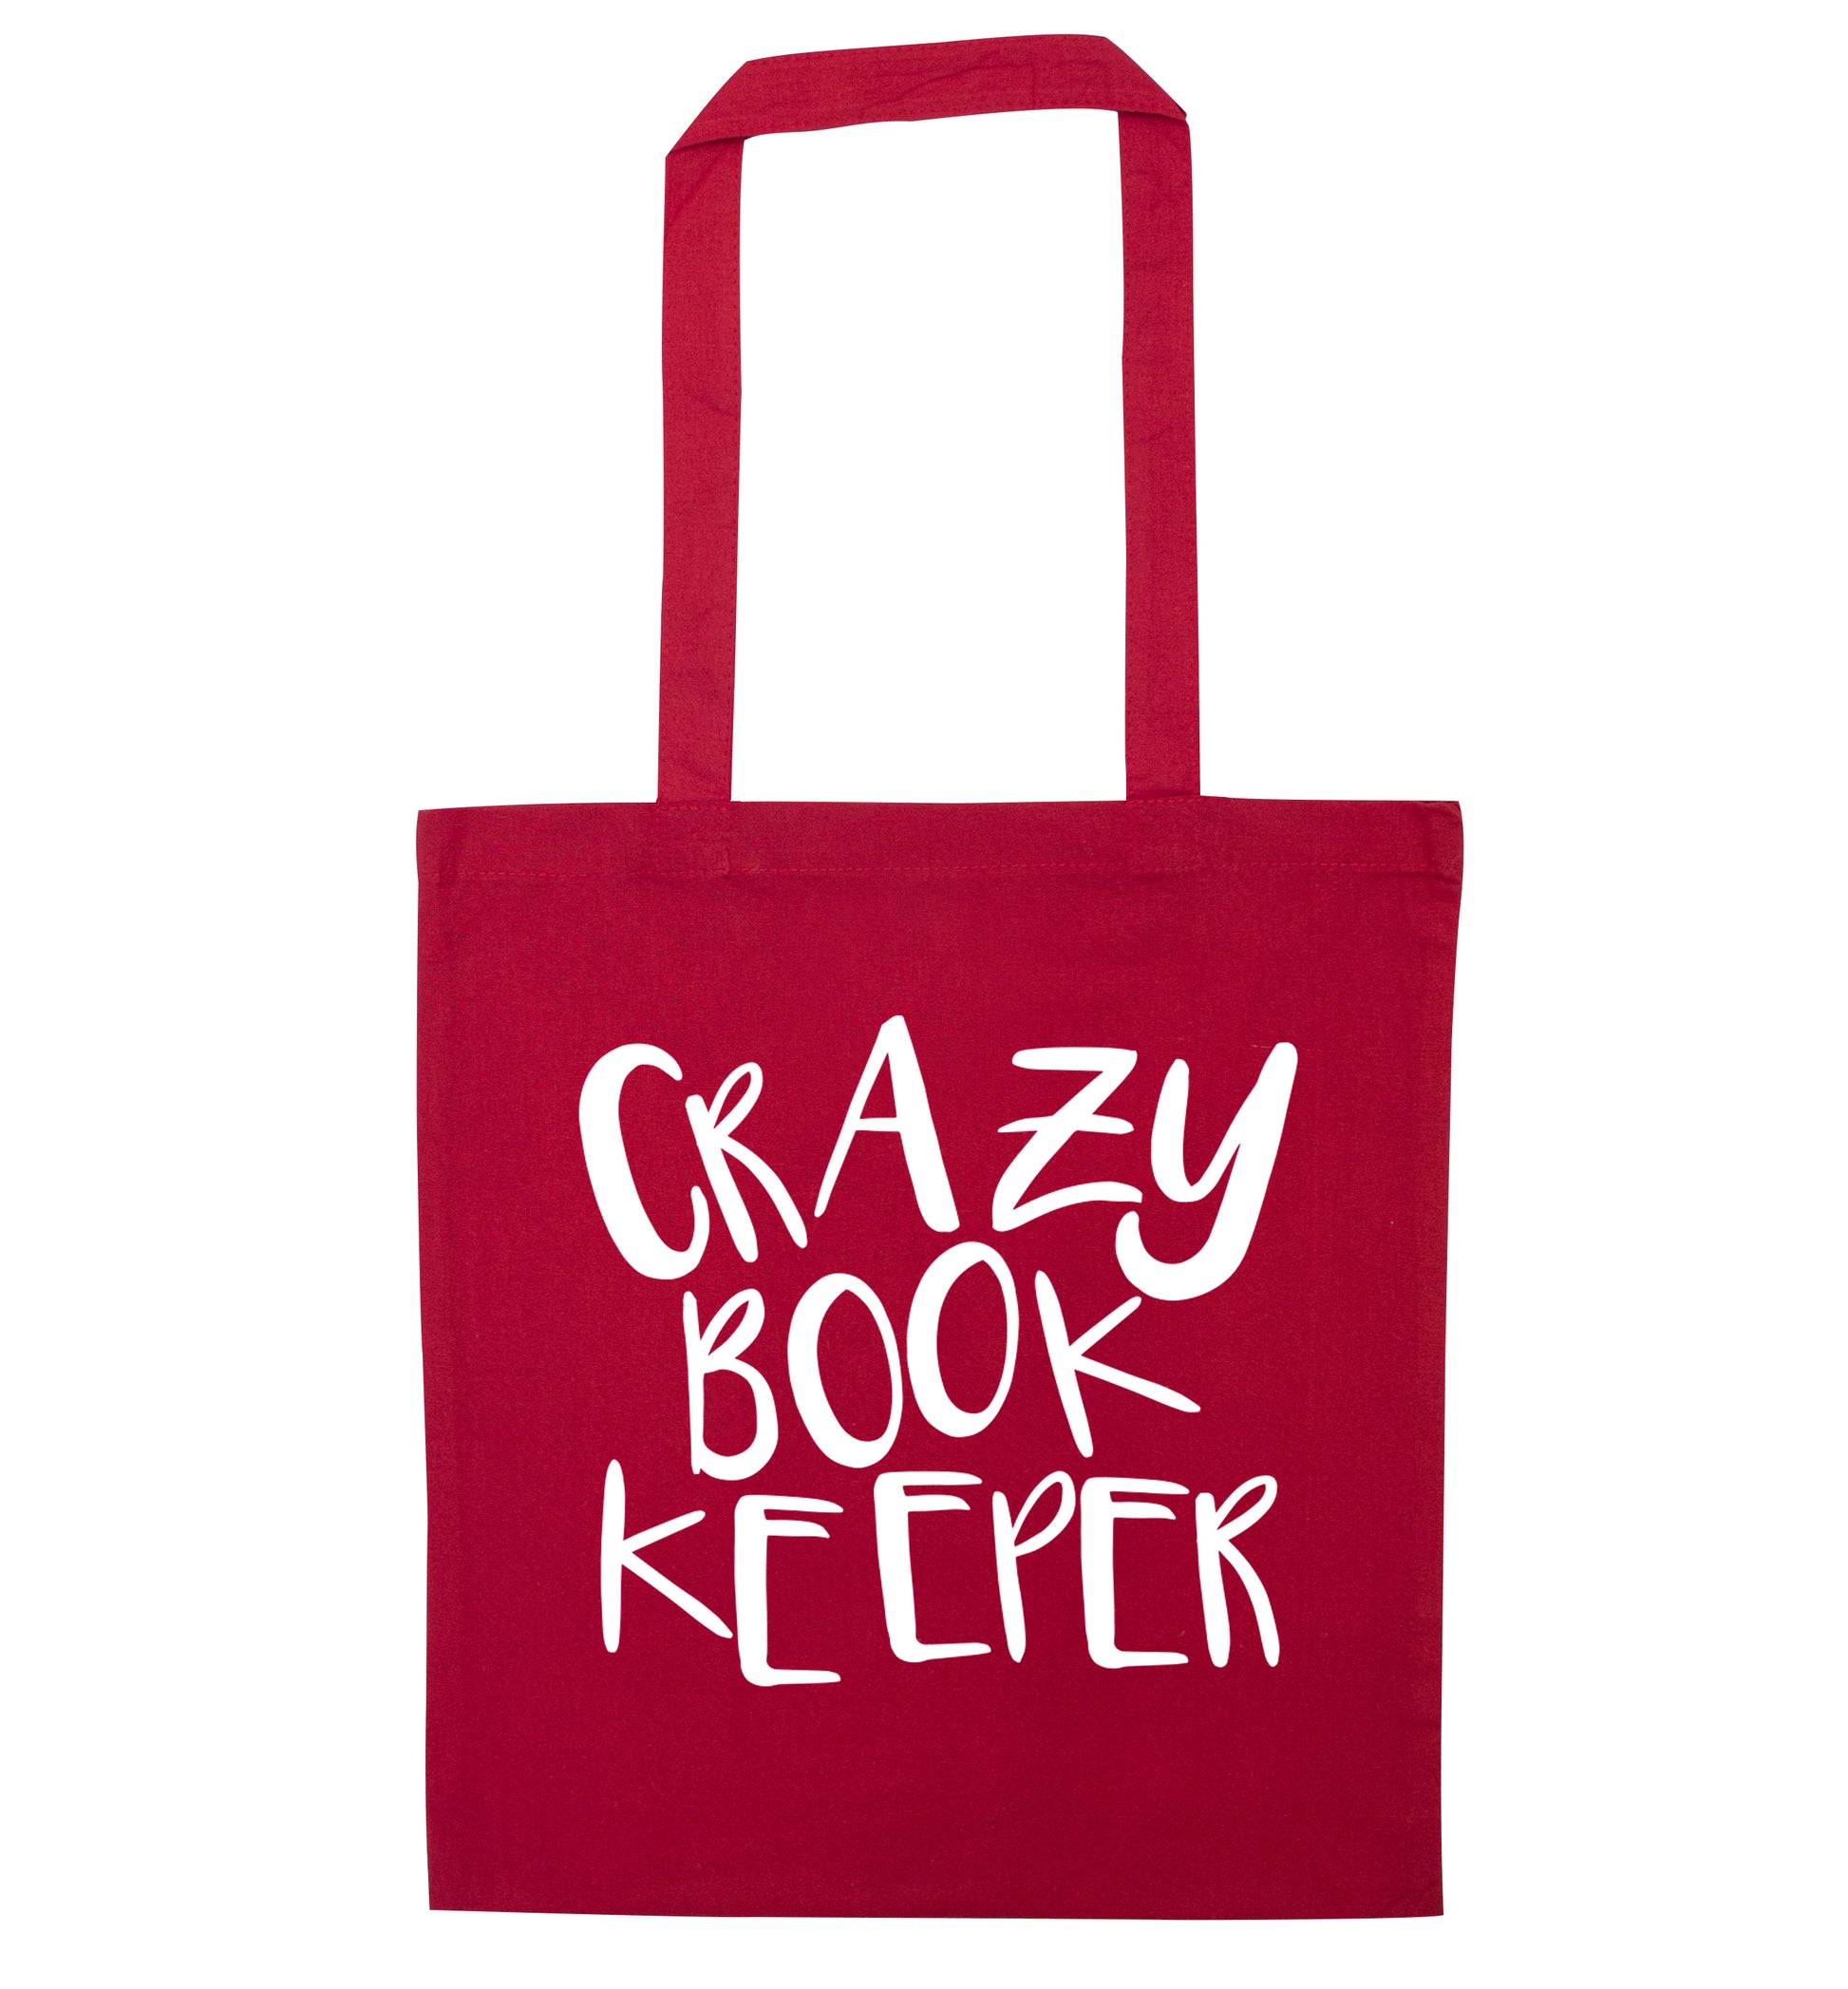 Crazy bookkeeper red tote bag